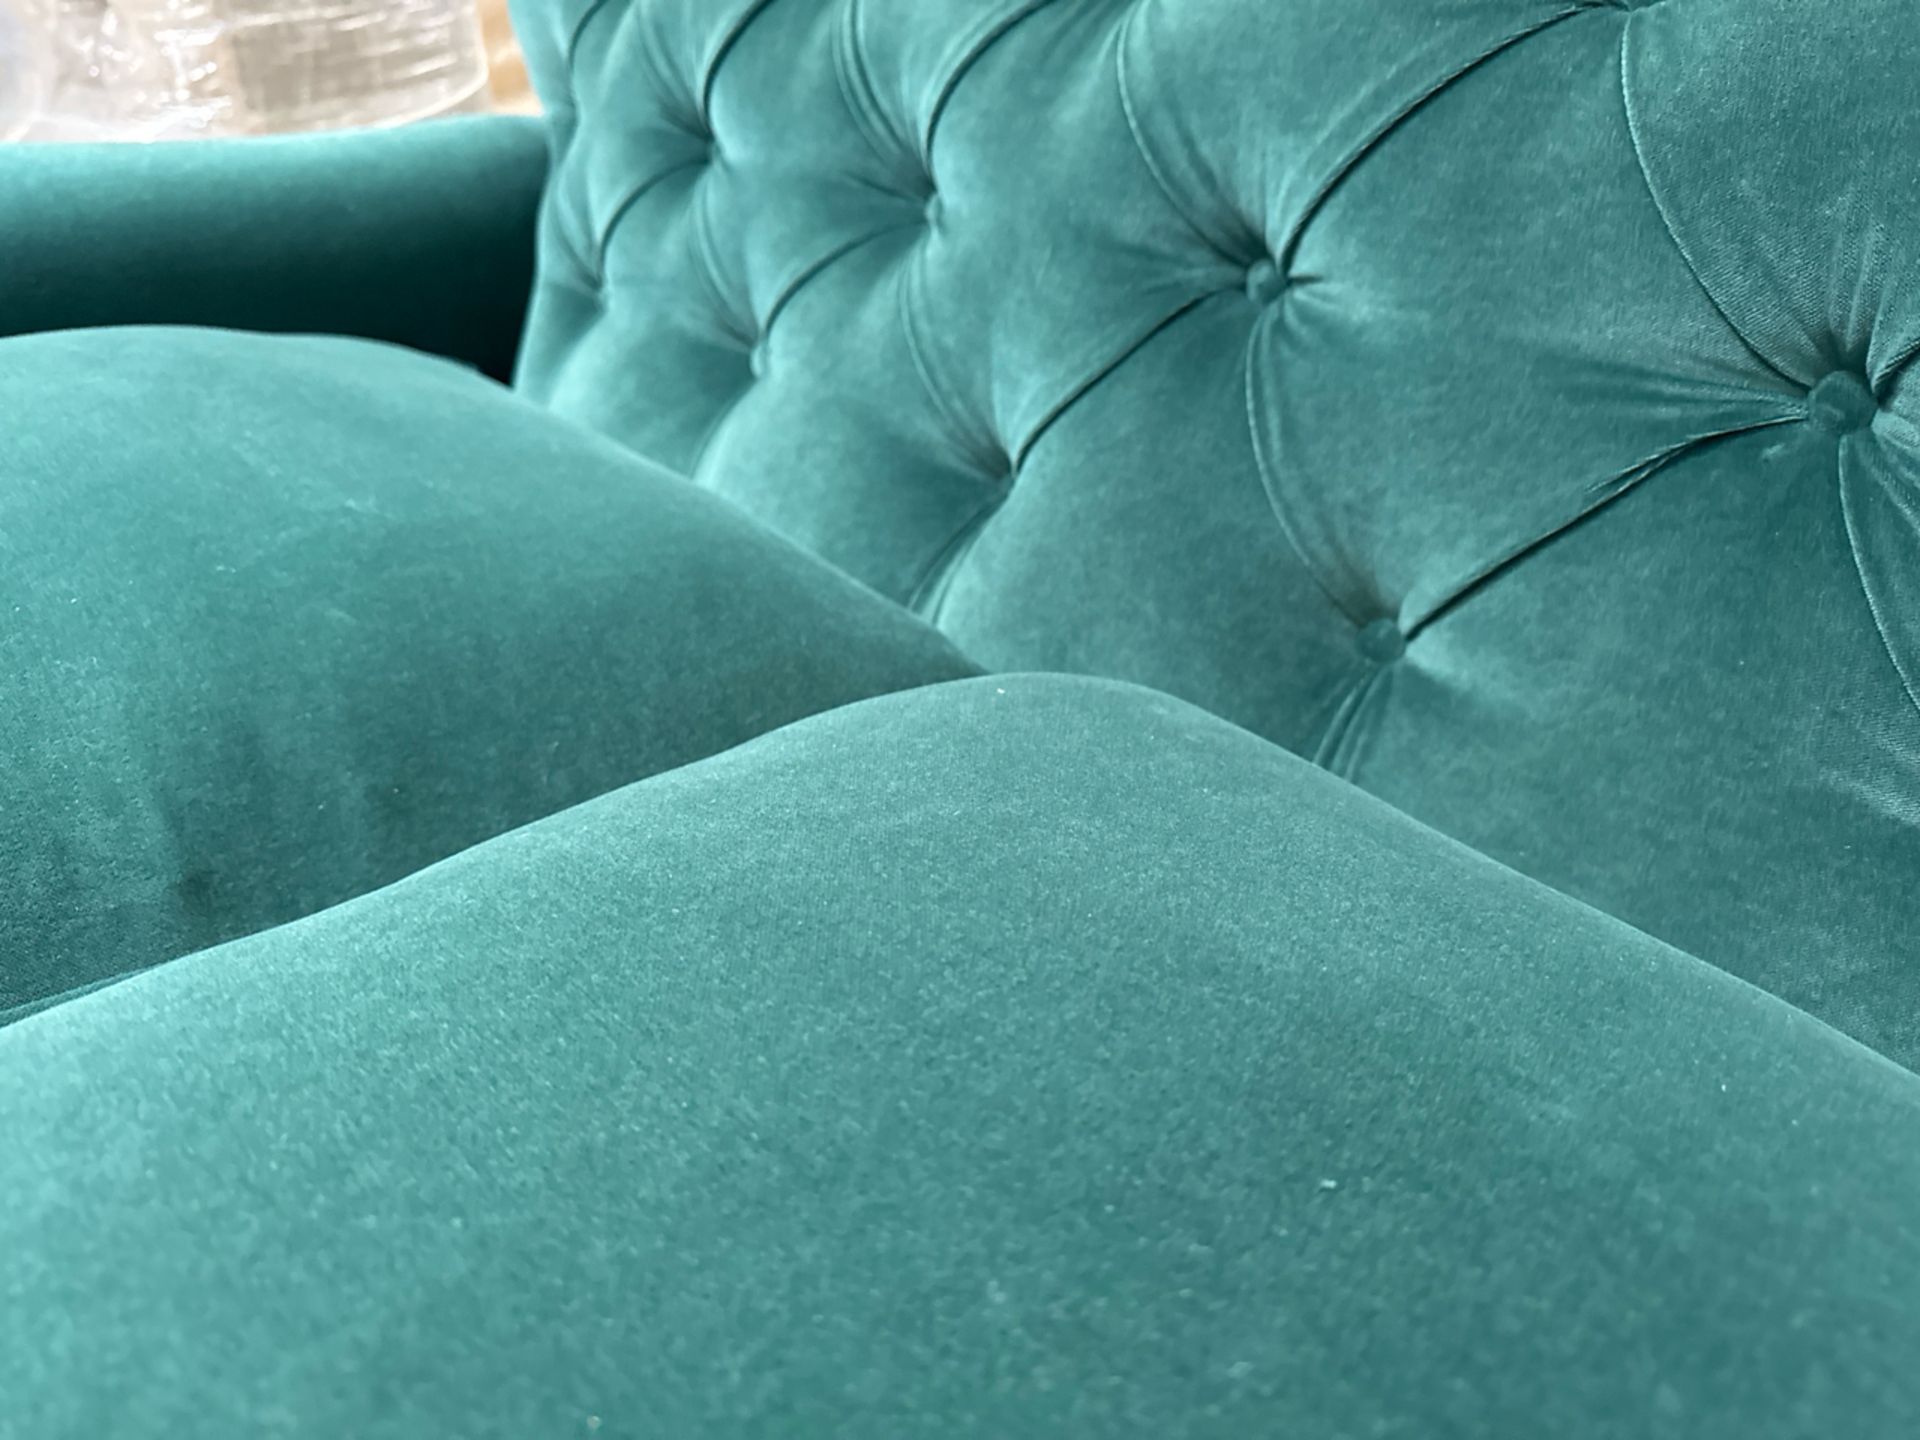 Snowdrop Button Back 2 Seat Sofa In Jade Smart Velvet RRP - £1890 - Image 6 of 6